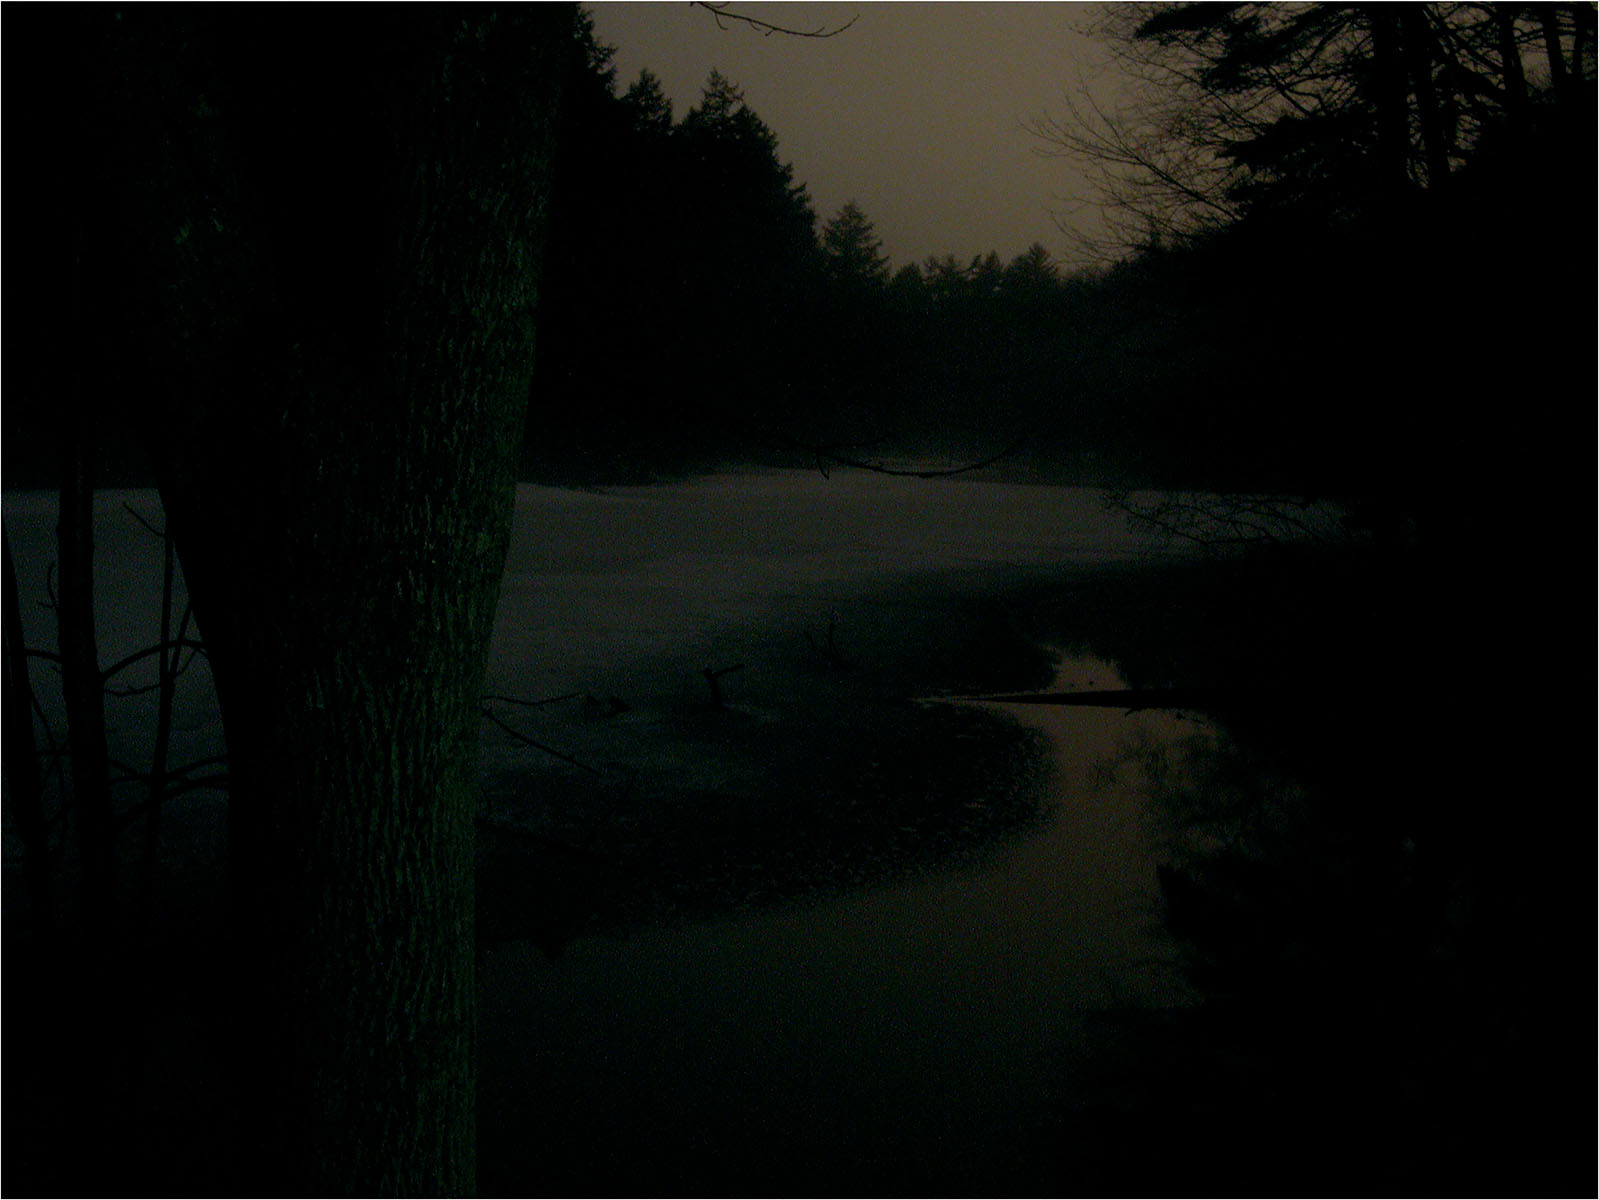 An Eerie Night in Winter: Icy Pond